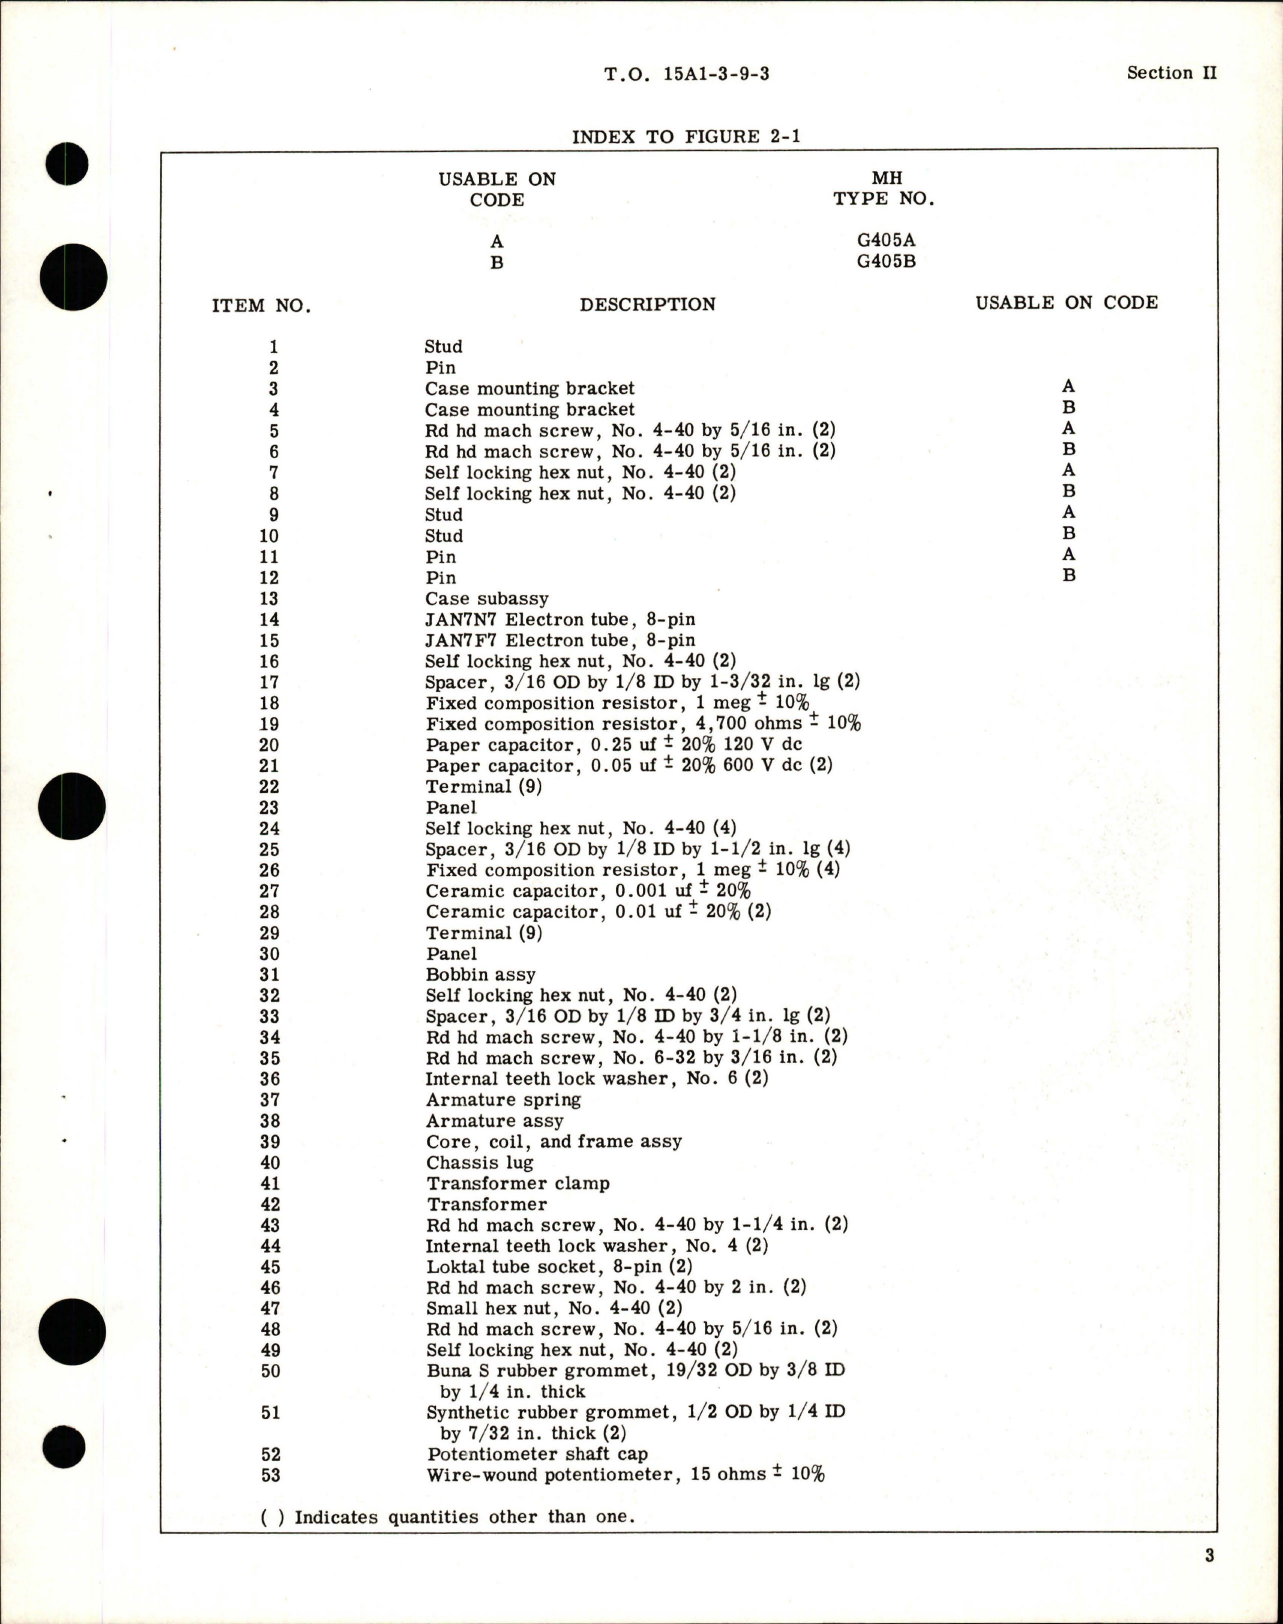 Sample page 7 from AirCorps Library document: Overhaul Instructions for Cabin Temperature Amplifier and Amplifier Rack - G405A, G405B, G1074A, and G1074B